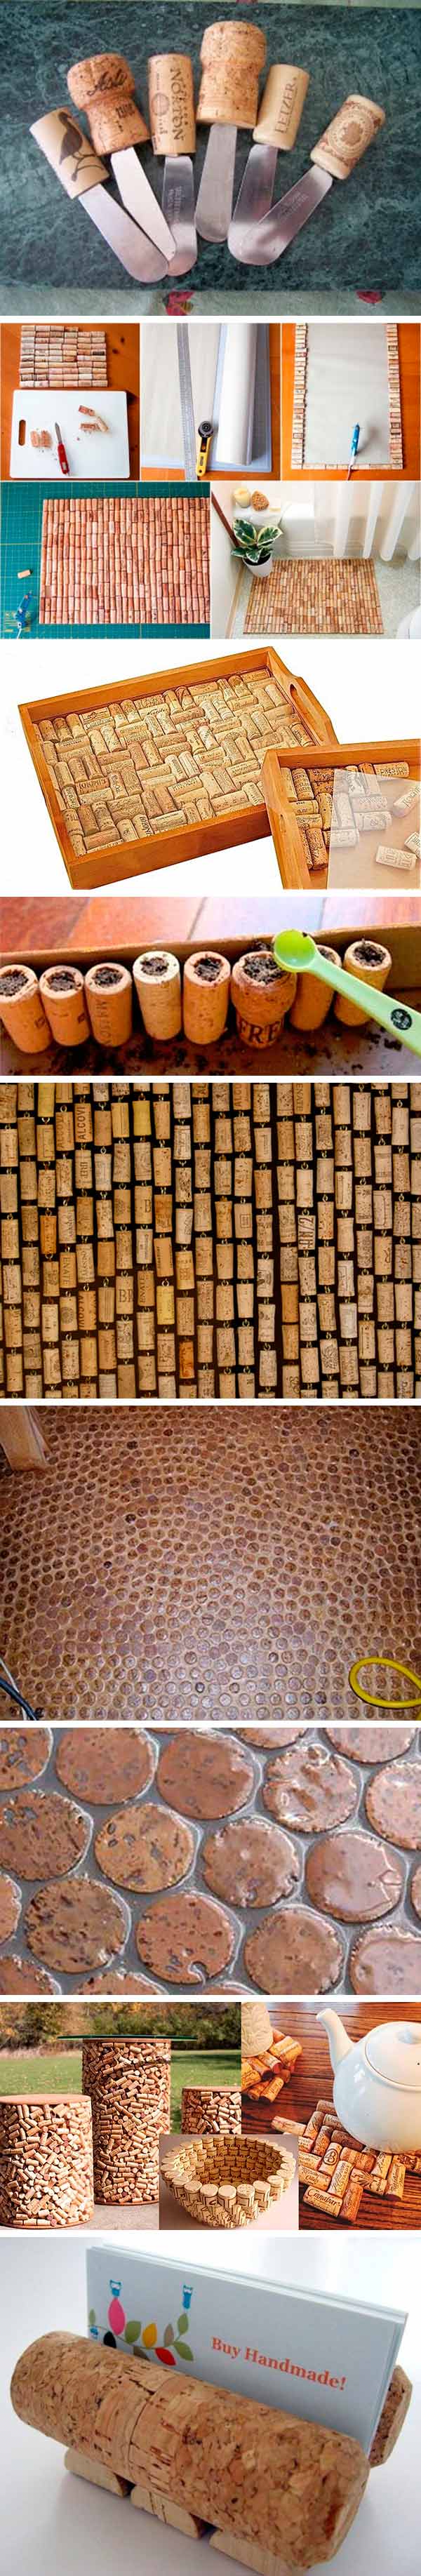 recycle corks - home 3